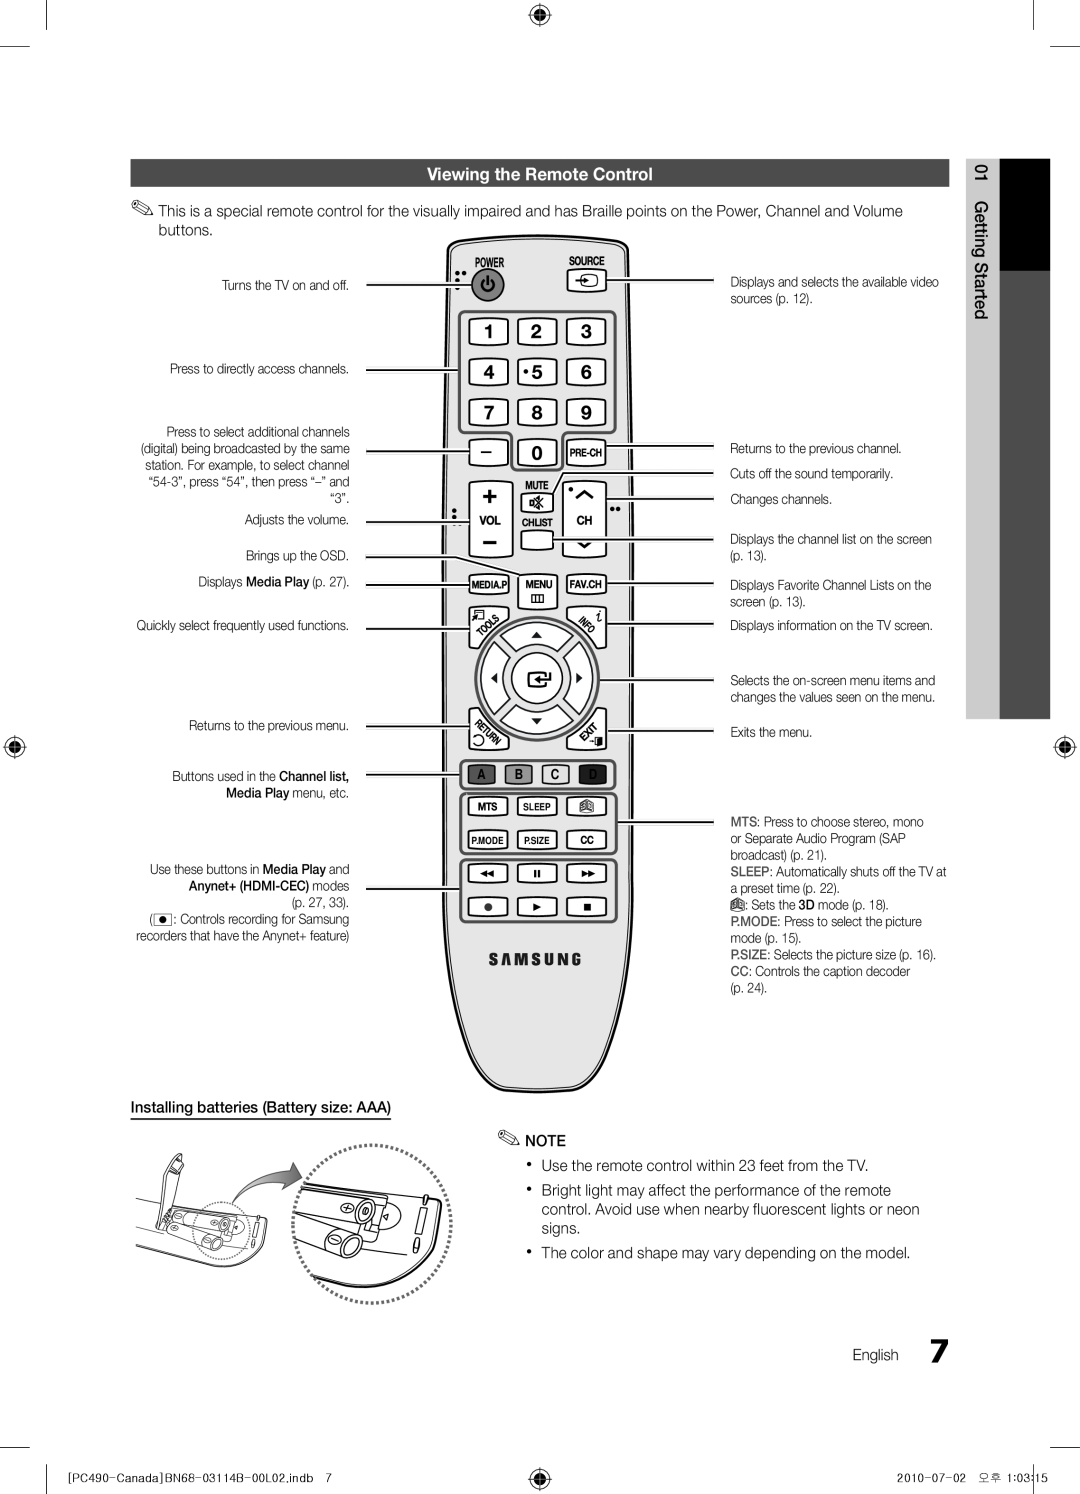 Samsung PN50C490, BN68-03114B-01, Series P4+ 490 Viewing the Remote Control, Installing batteries Battery size AAA, A B C D 